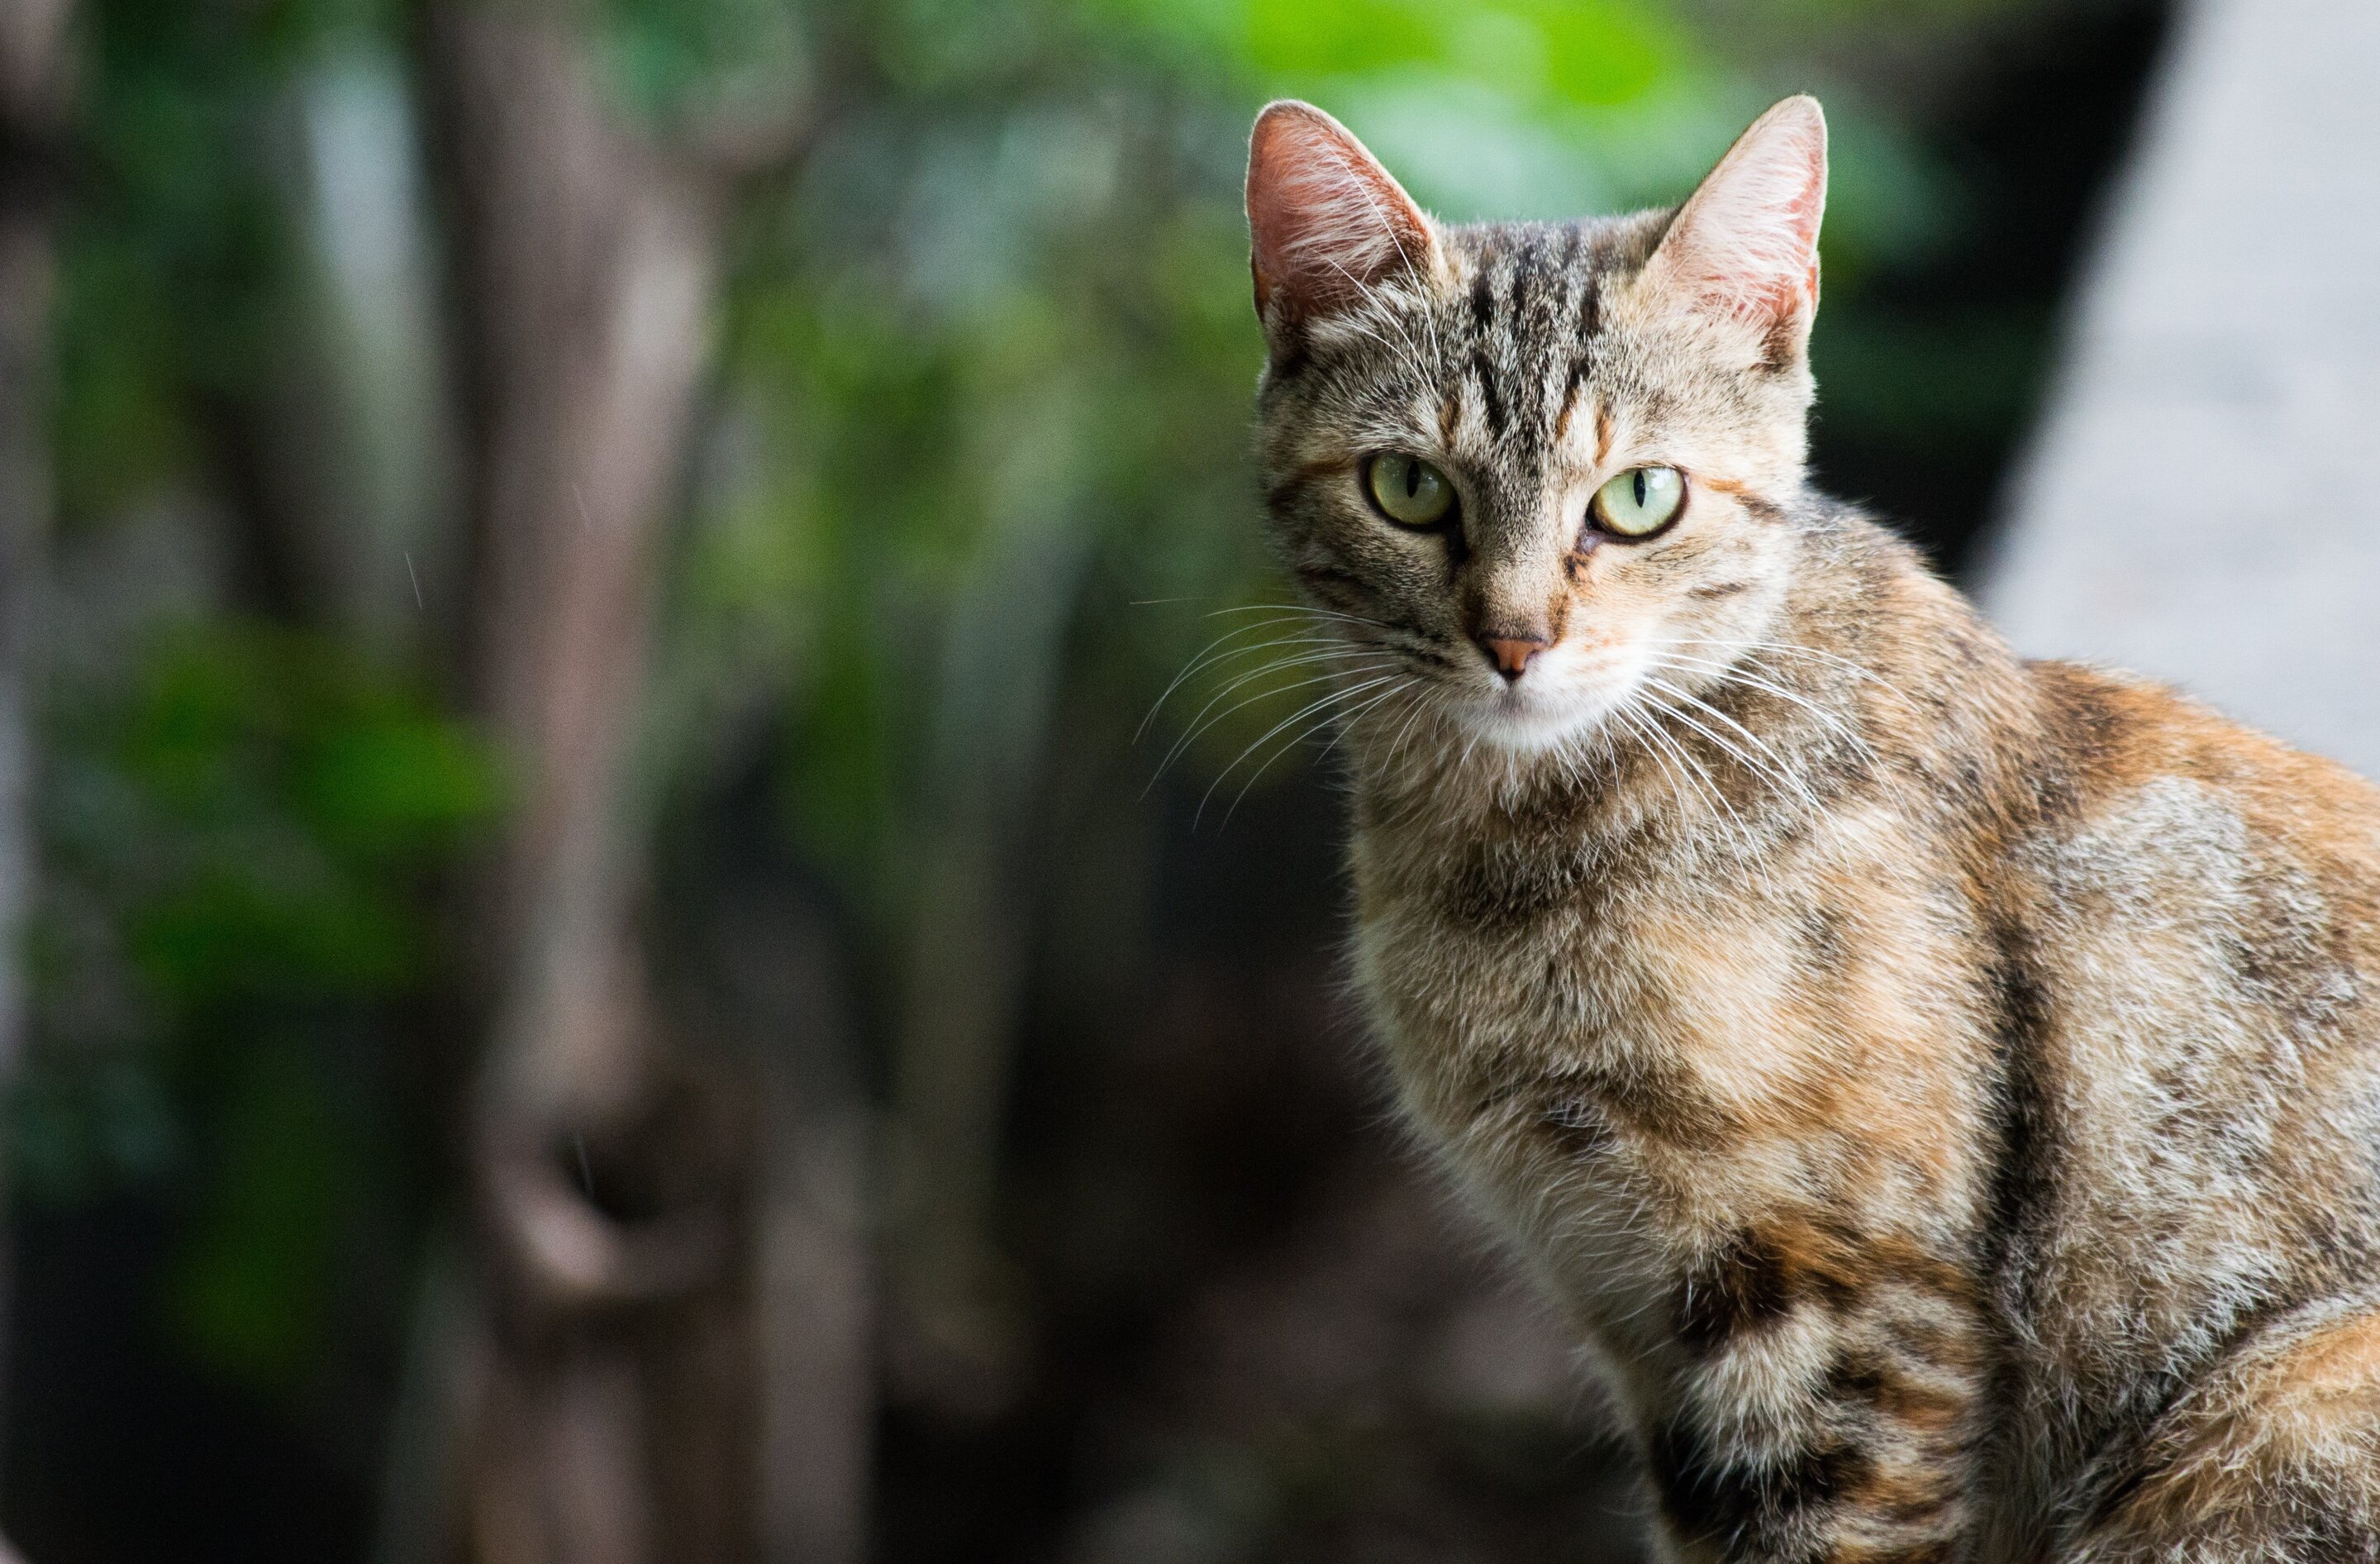 Cat illnesses have $6 billion affect on human well being in Australia